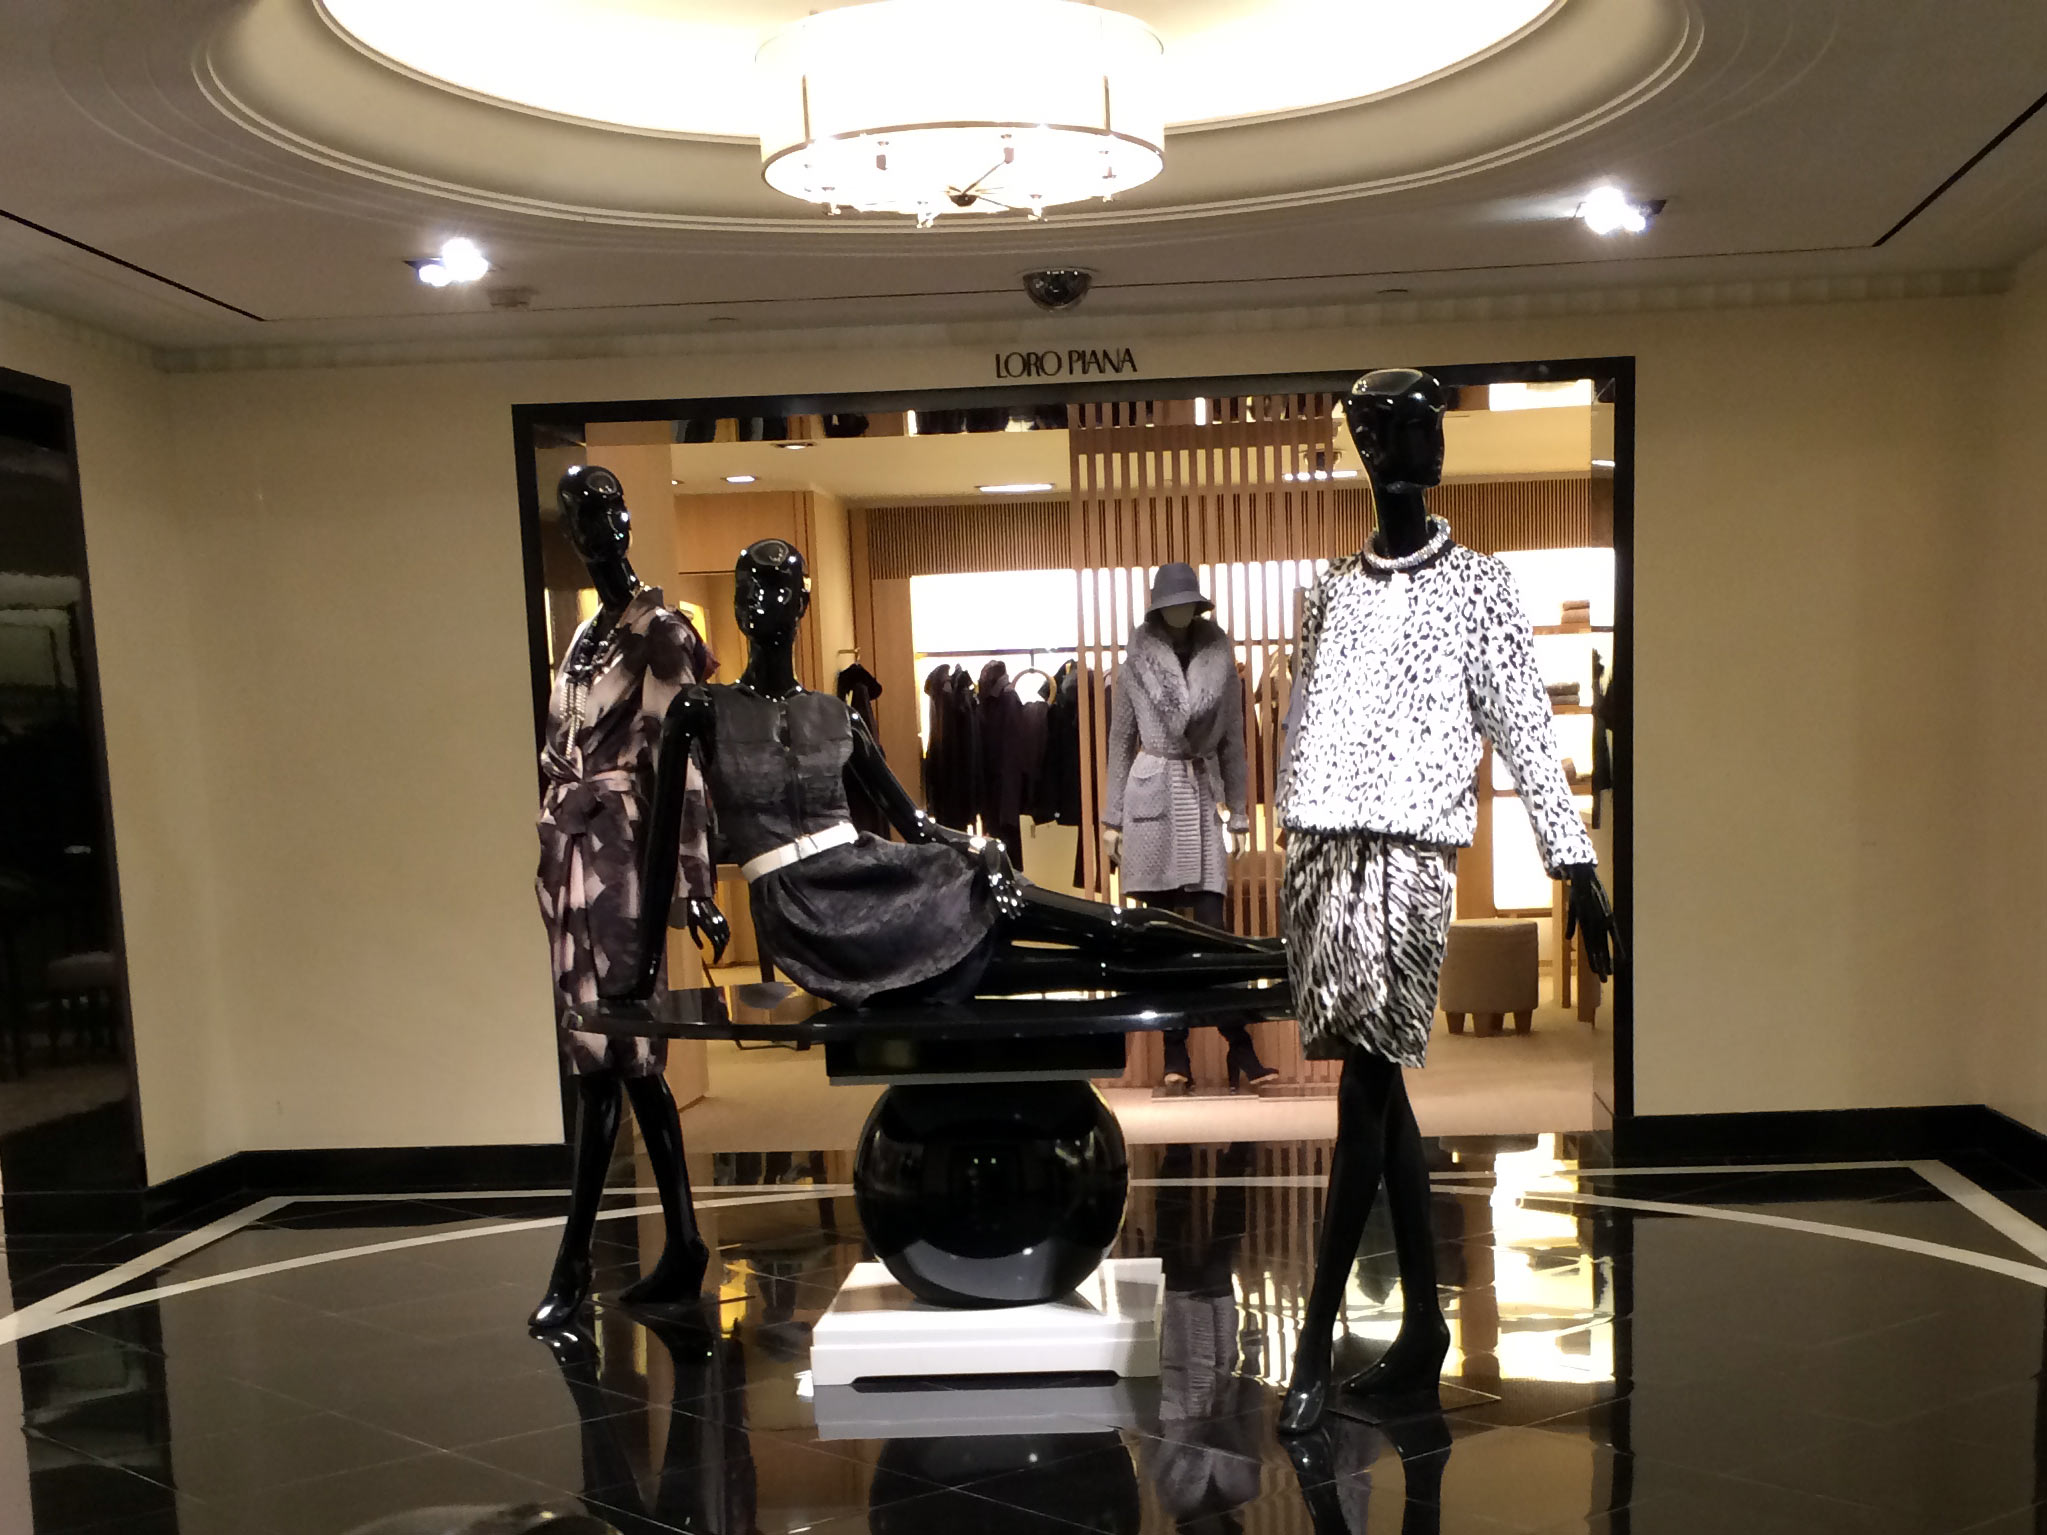 Fashion display at Bergdorf Goodman in New York. Photo by alphacityguides.